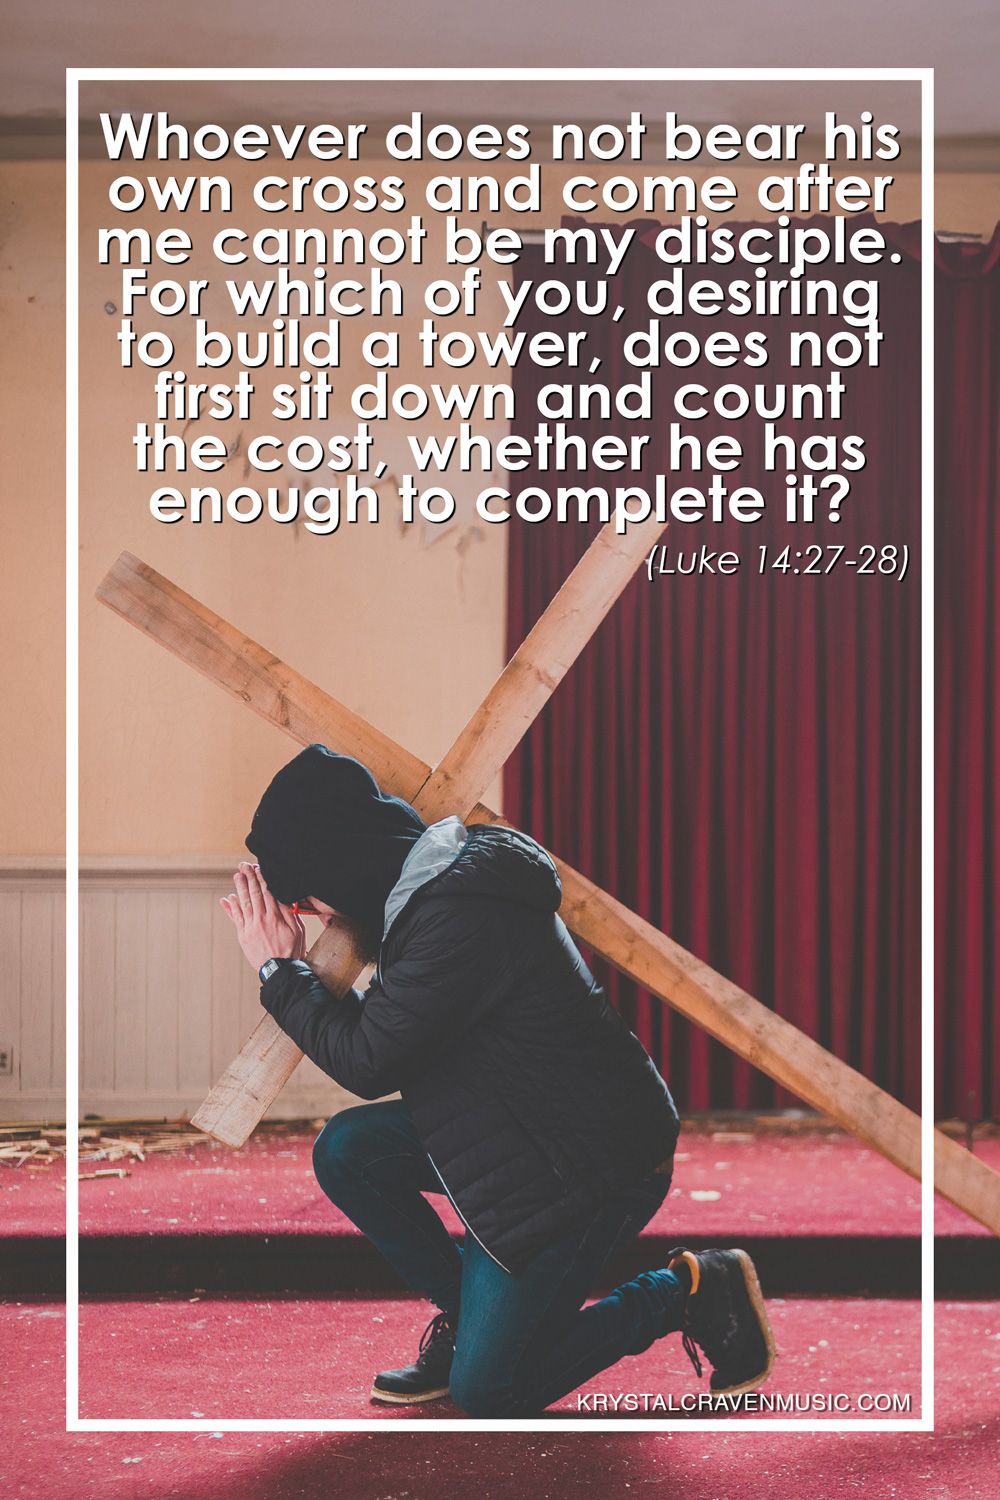 The text from Luke 14:27-28 that reads "Whoever does not bear his own cross and come after me cannot be my disciple. For which of you, desiring to build a tower, does not first sit down and count the cost, whether he has enough to complete it?" over a man kneeling in a dilapidated building with a cross on his shoulder.